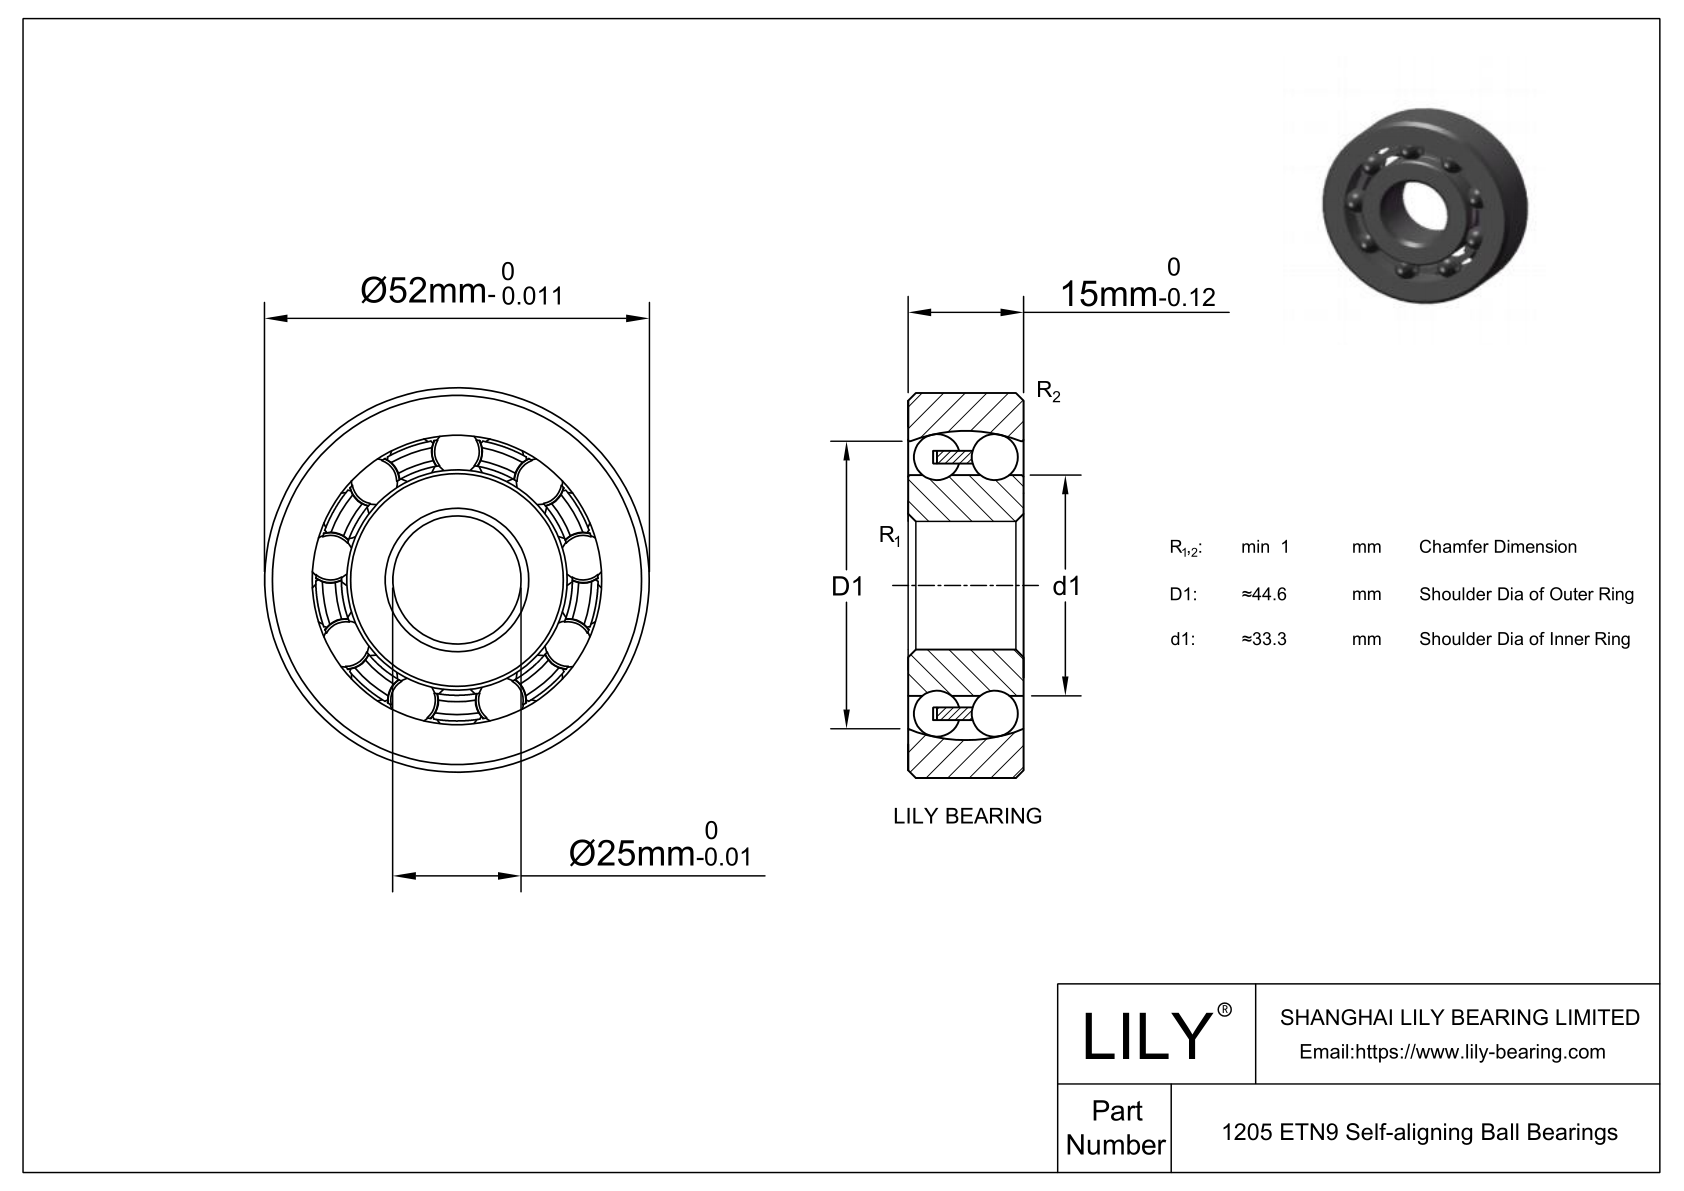 S1205 ETN9 Stainless Steel Self Aligning Ball Bearings cad drawing